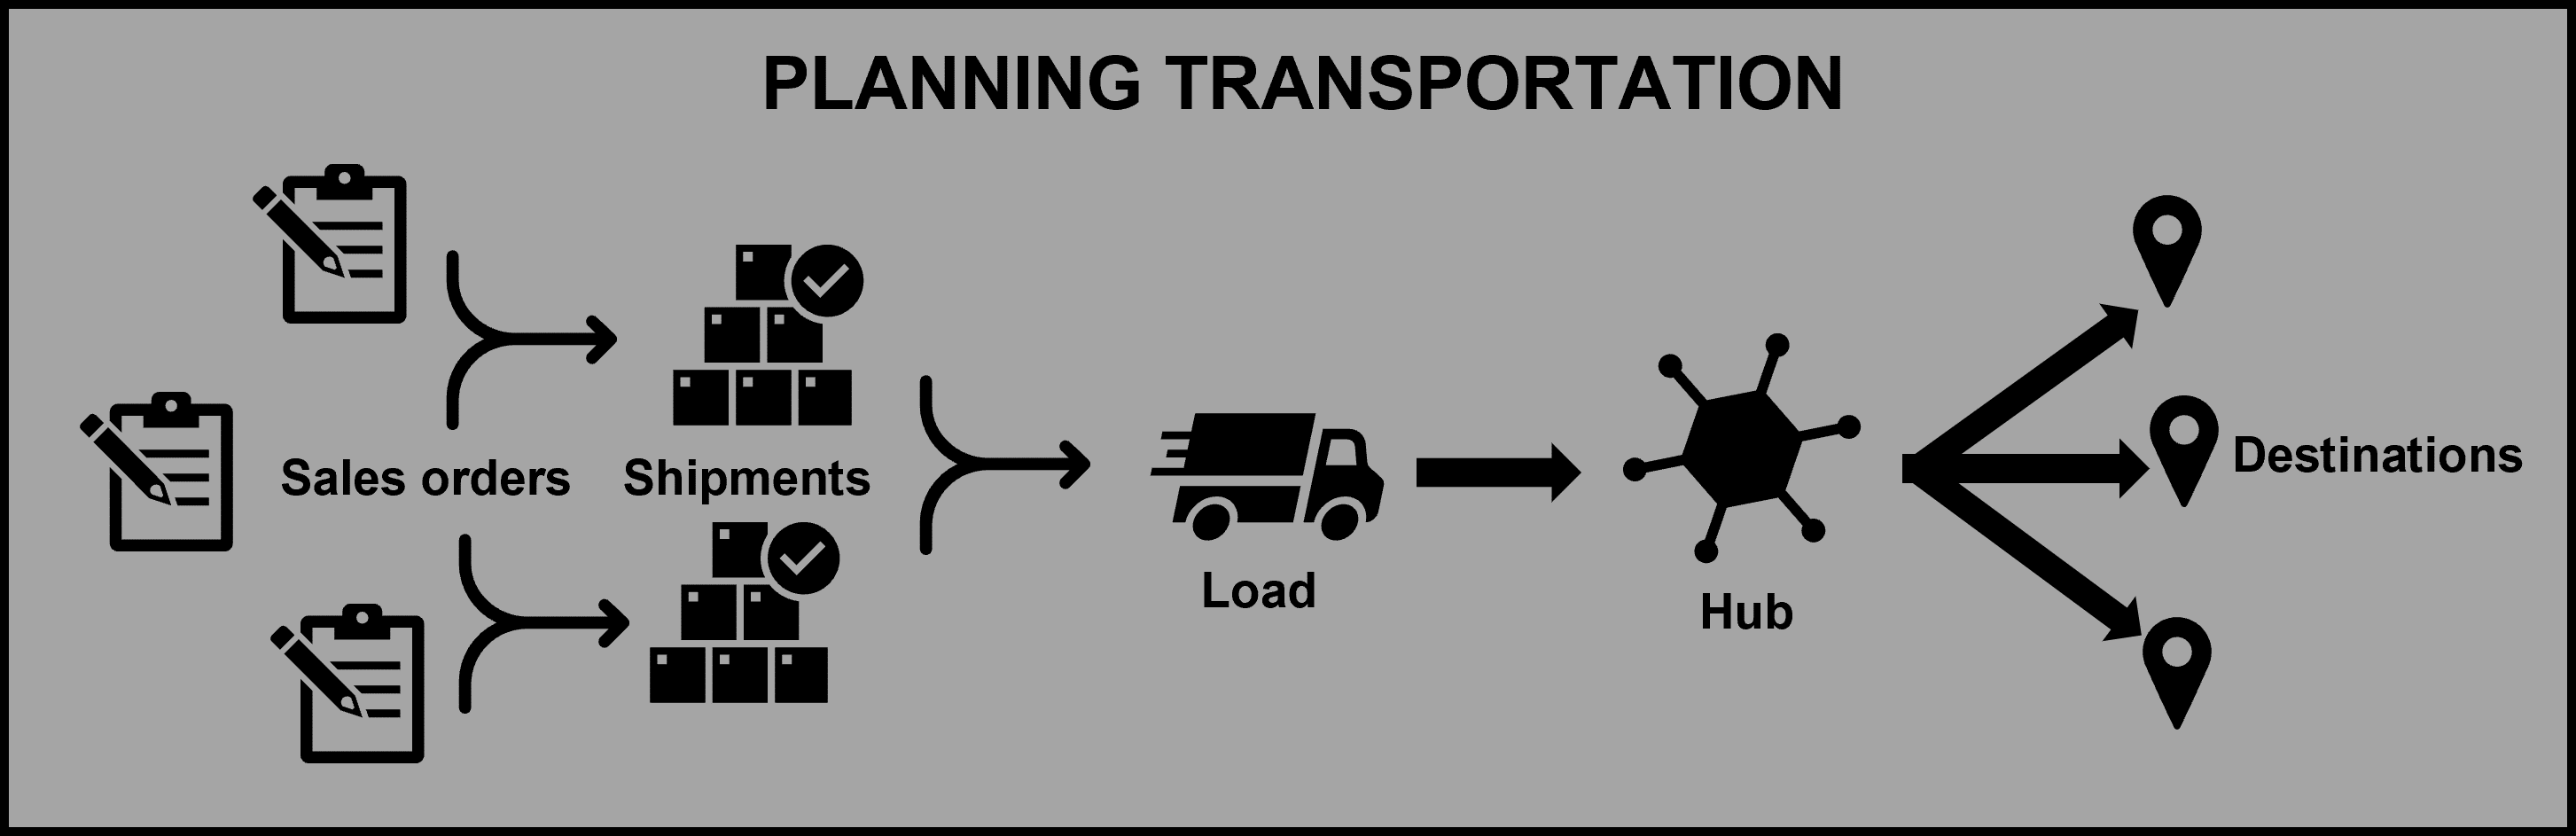 Diagram depicts the different processes of planning transportation: Sales order, Shipments, Load, Hub, Destinations.